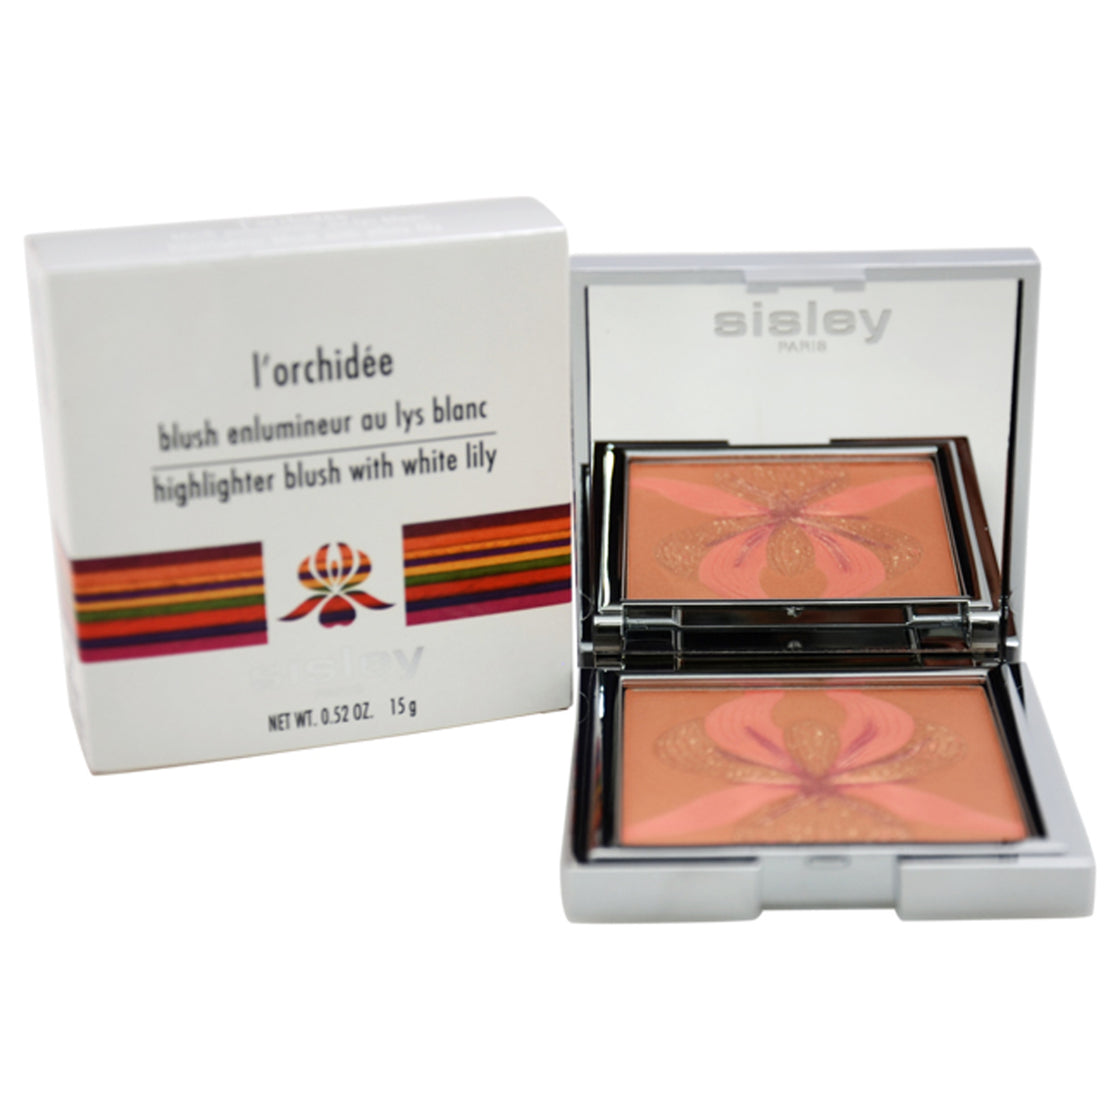 LOrchidee Highlighter Blush With White Lily - 1 Orange by Sisley for Women - 0.52 oz Makeup